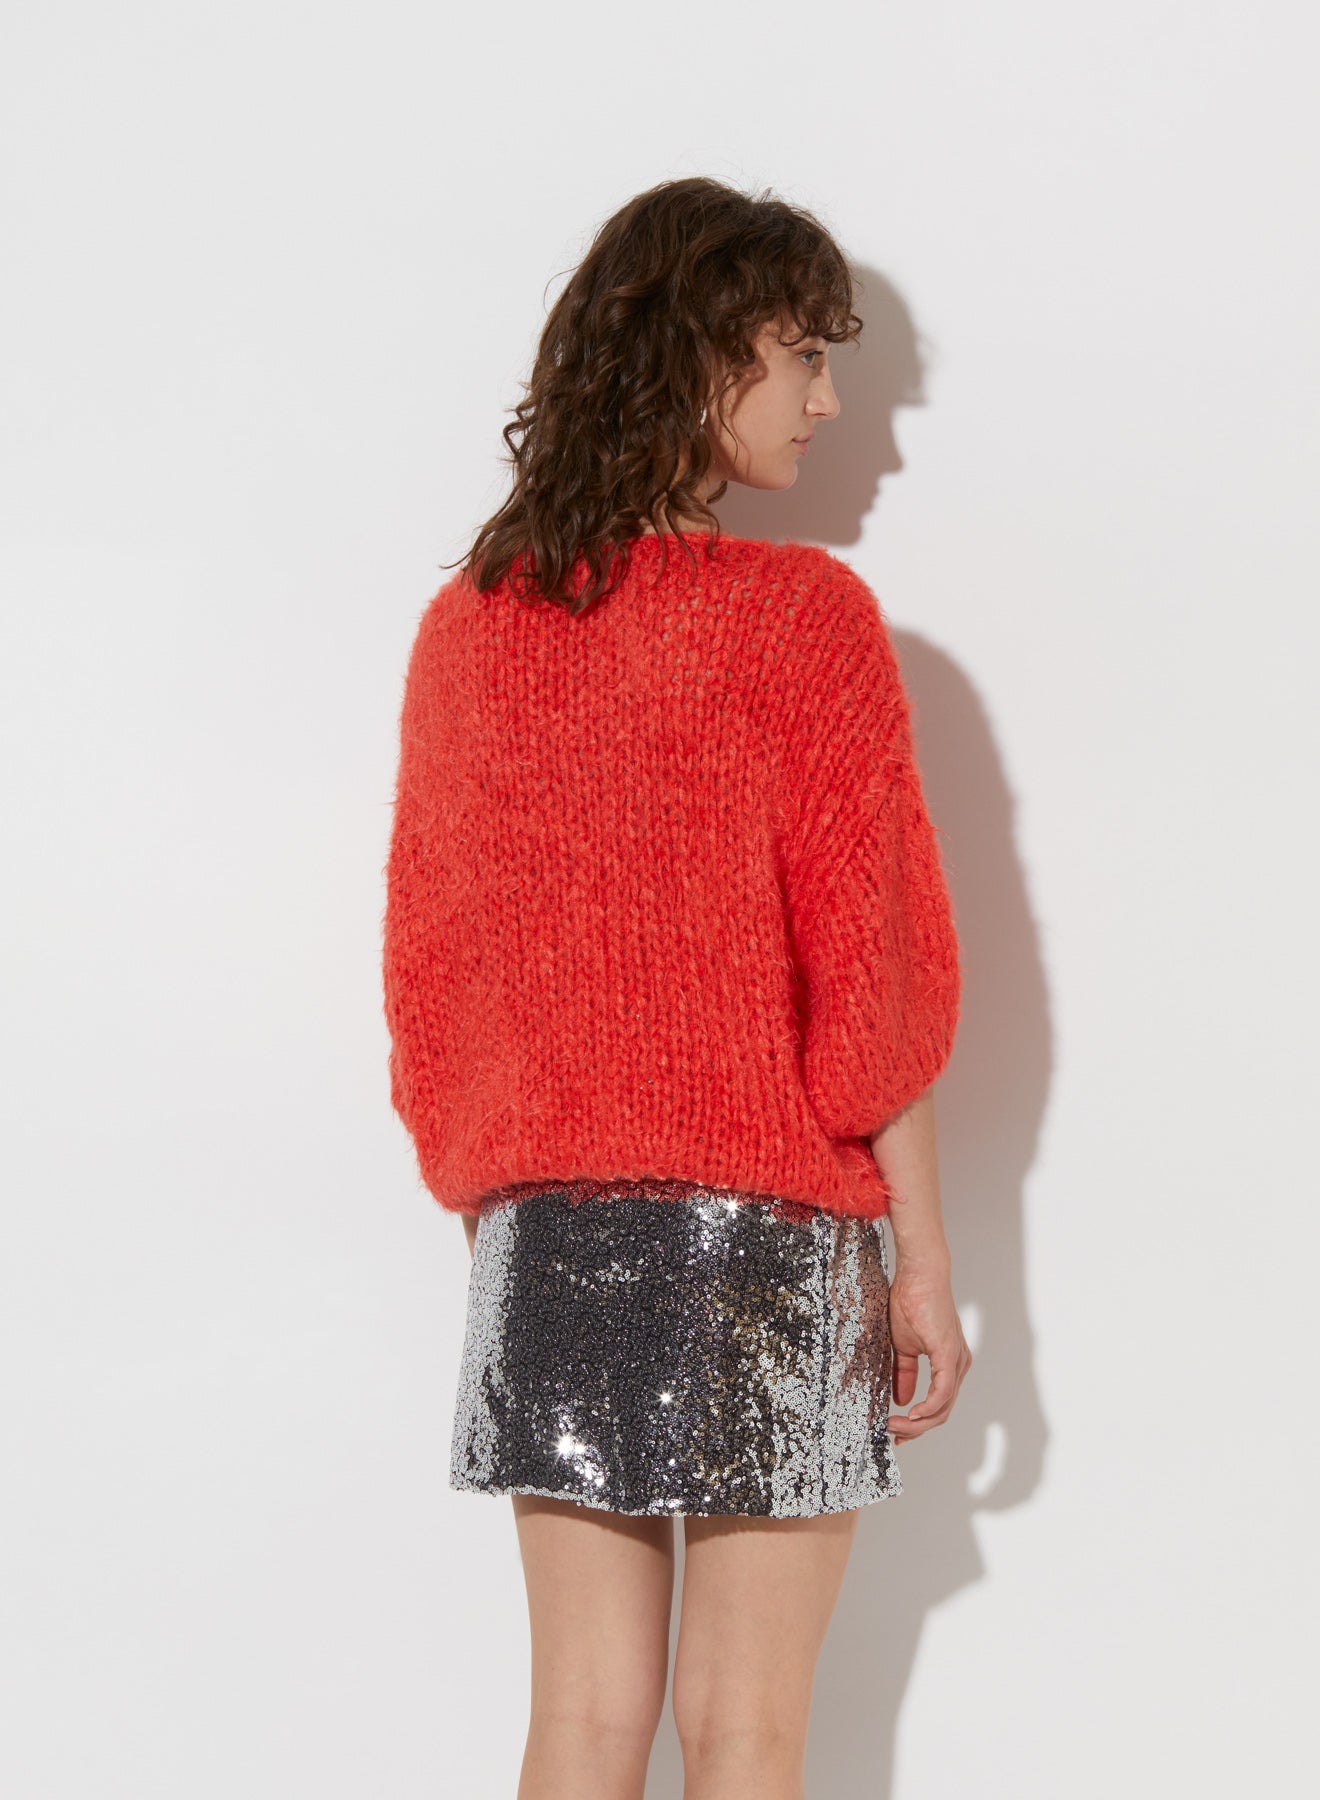 Silk Knit, Neon Red, Pullover